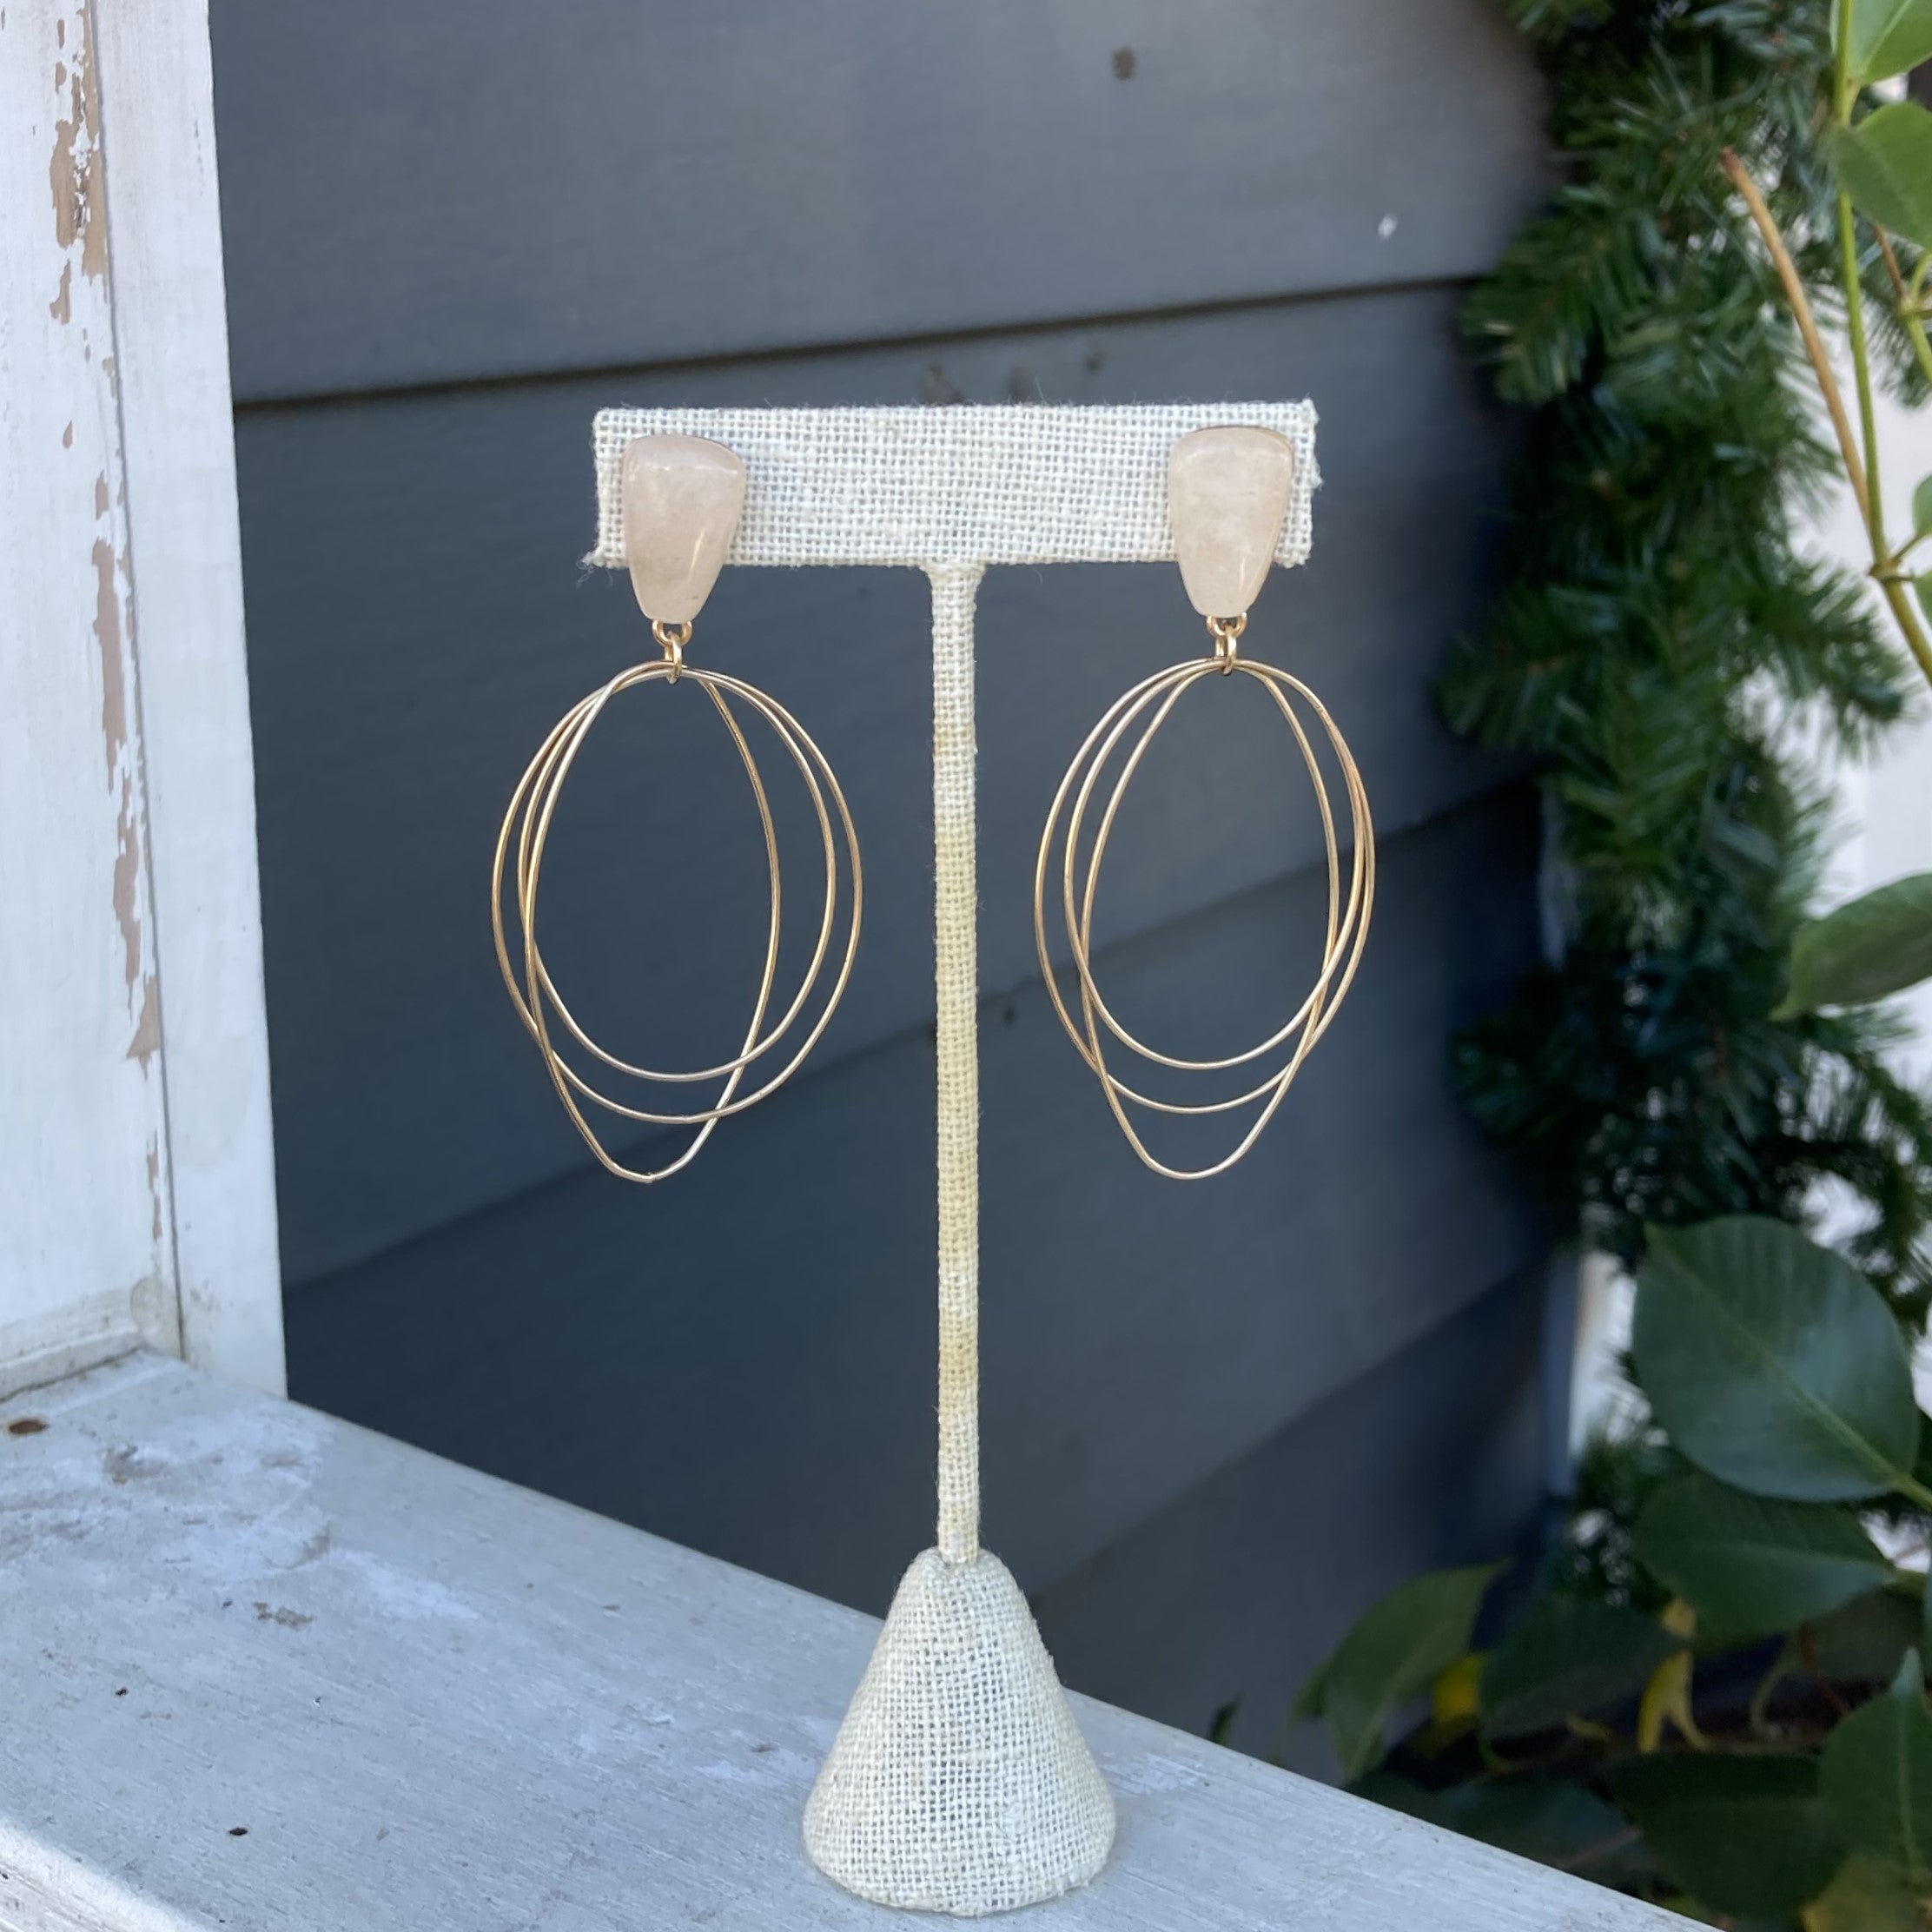 Add a captivating touch of glamour to your look with these Stone and Triple Wire Earrings. Crafted with a stunning stone top and three different sized gold wire hoops, these earrings are sure to make a statement! 